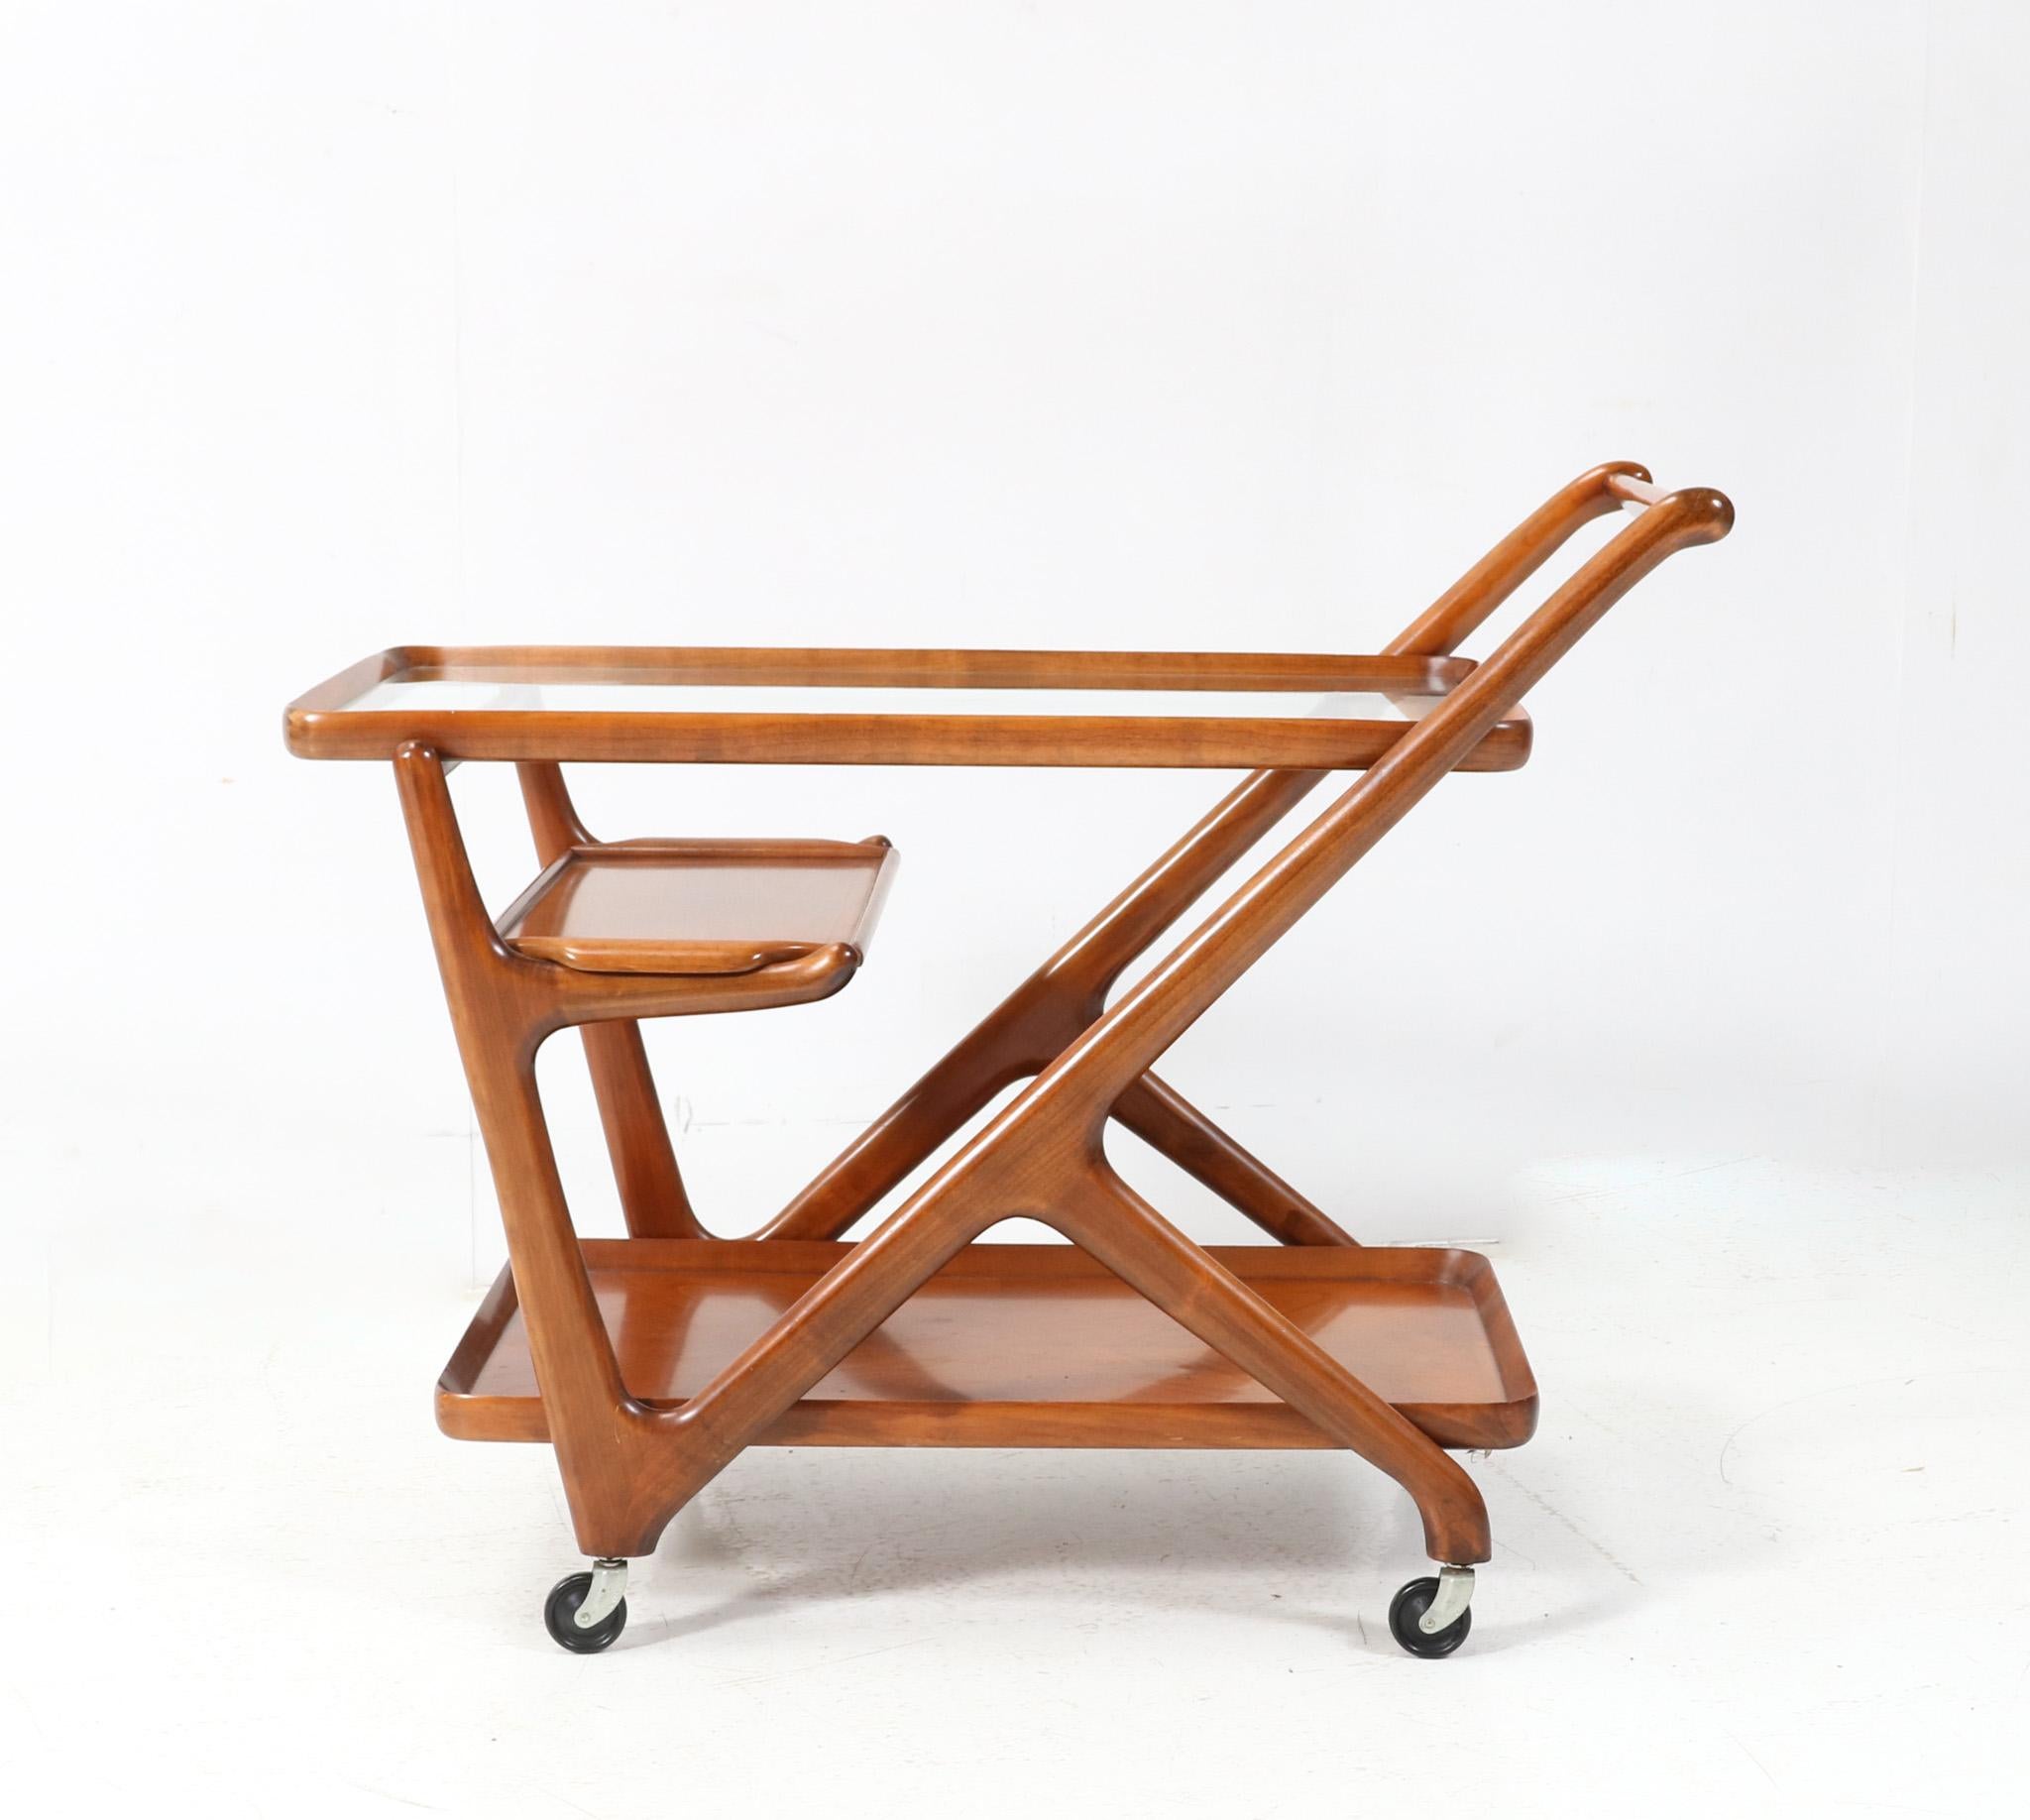 Italian Cherry Mid-Century Modern Trolley or Bar Cart by Cesare Lacca for Cassina, 1950s